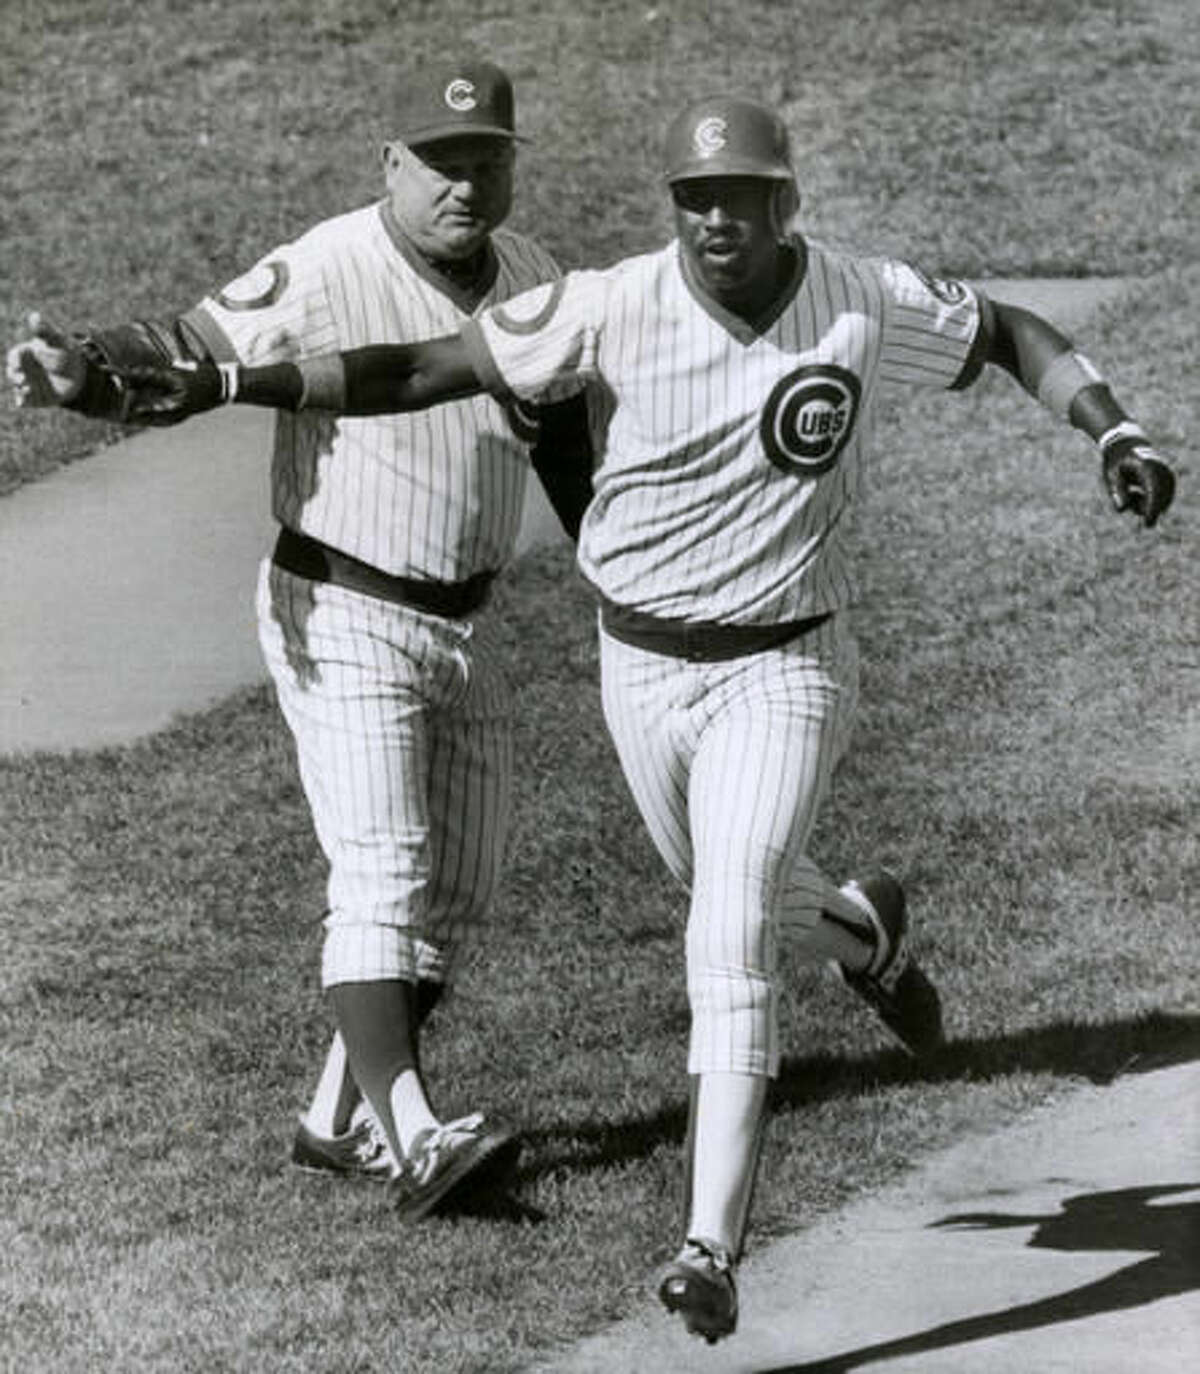 FILE - In this Oct. 2, 1984, file photo, Chicago Cubs third base coach Don Zimmer, left, congratulates Gary Matthews on his home run of San Diego Padres' Eric Snow during the first inning of Game 1 of the NL Championship Series in Chicago. Matthews hit another homer later in the game. Matthews was a Cubs star when the team lost three straight games in the NLCS in 1984 and missed going the World Series. In 2003, he was the Cubs' hitting coach when they again lost three in a row in the NLCS and missed a chance to reach the World Series. (AP Photo/Fred Jewell, File)